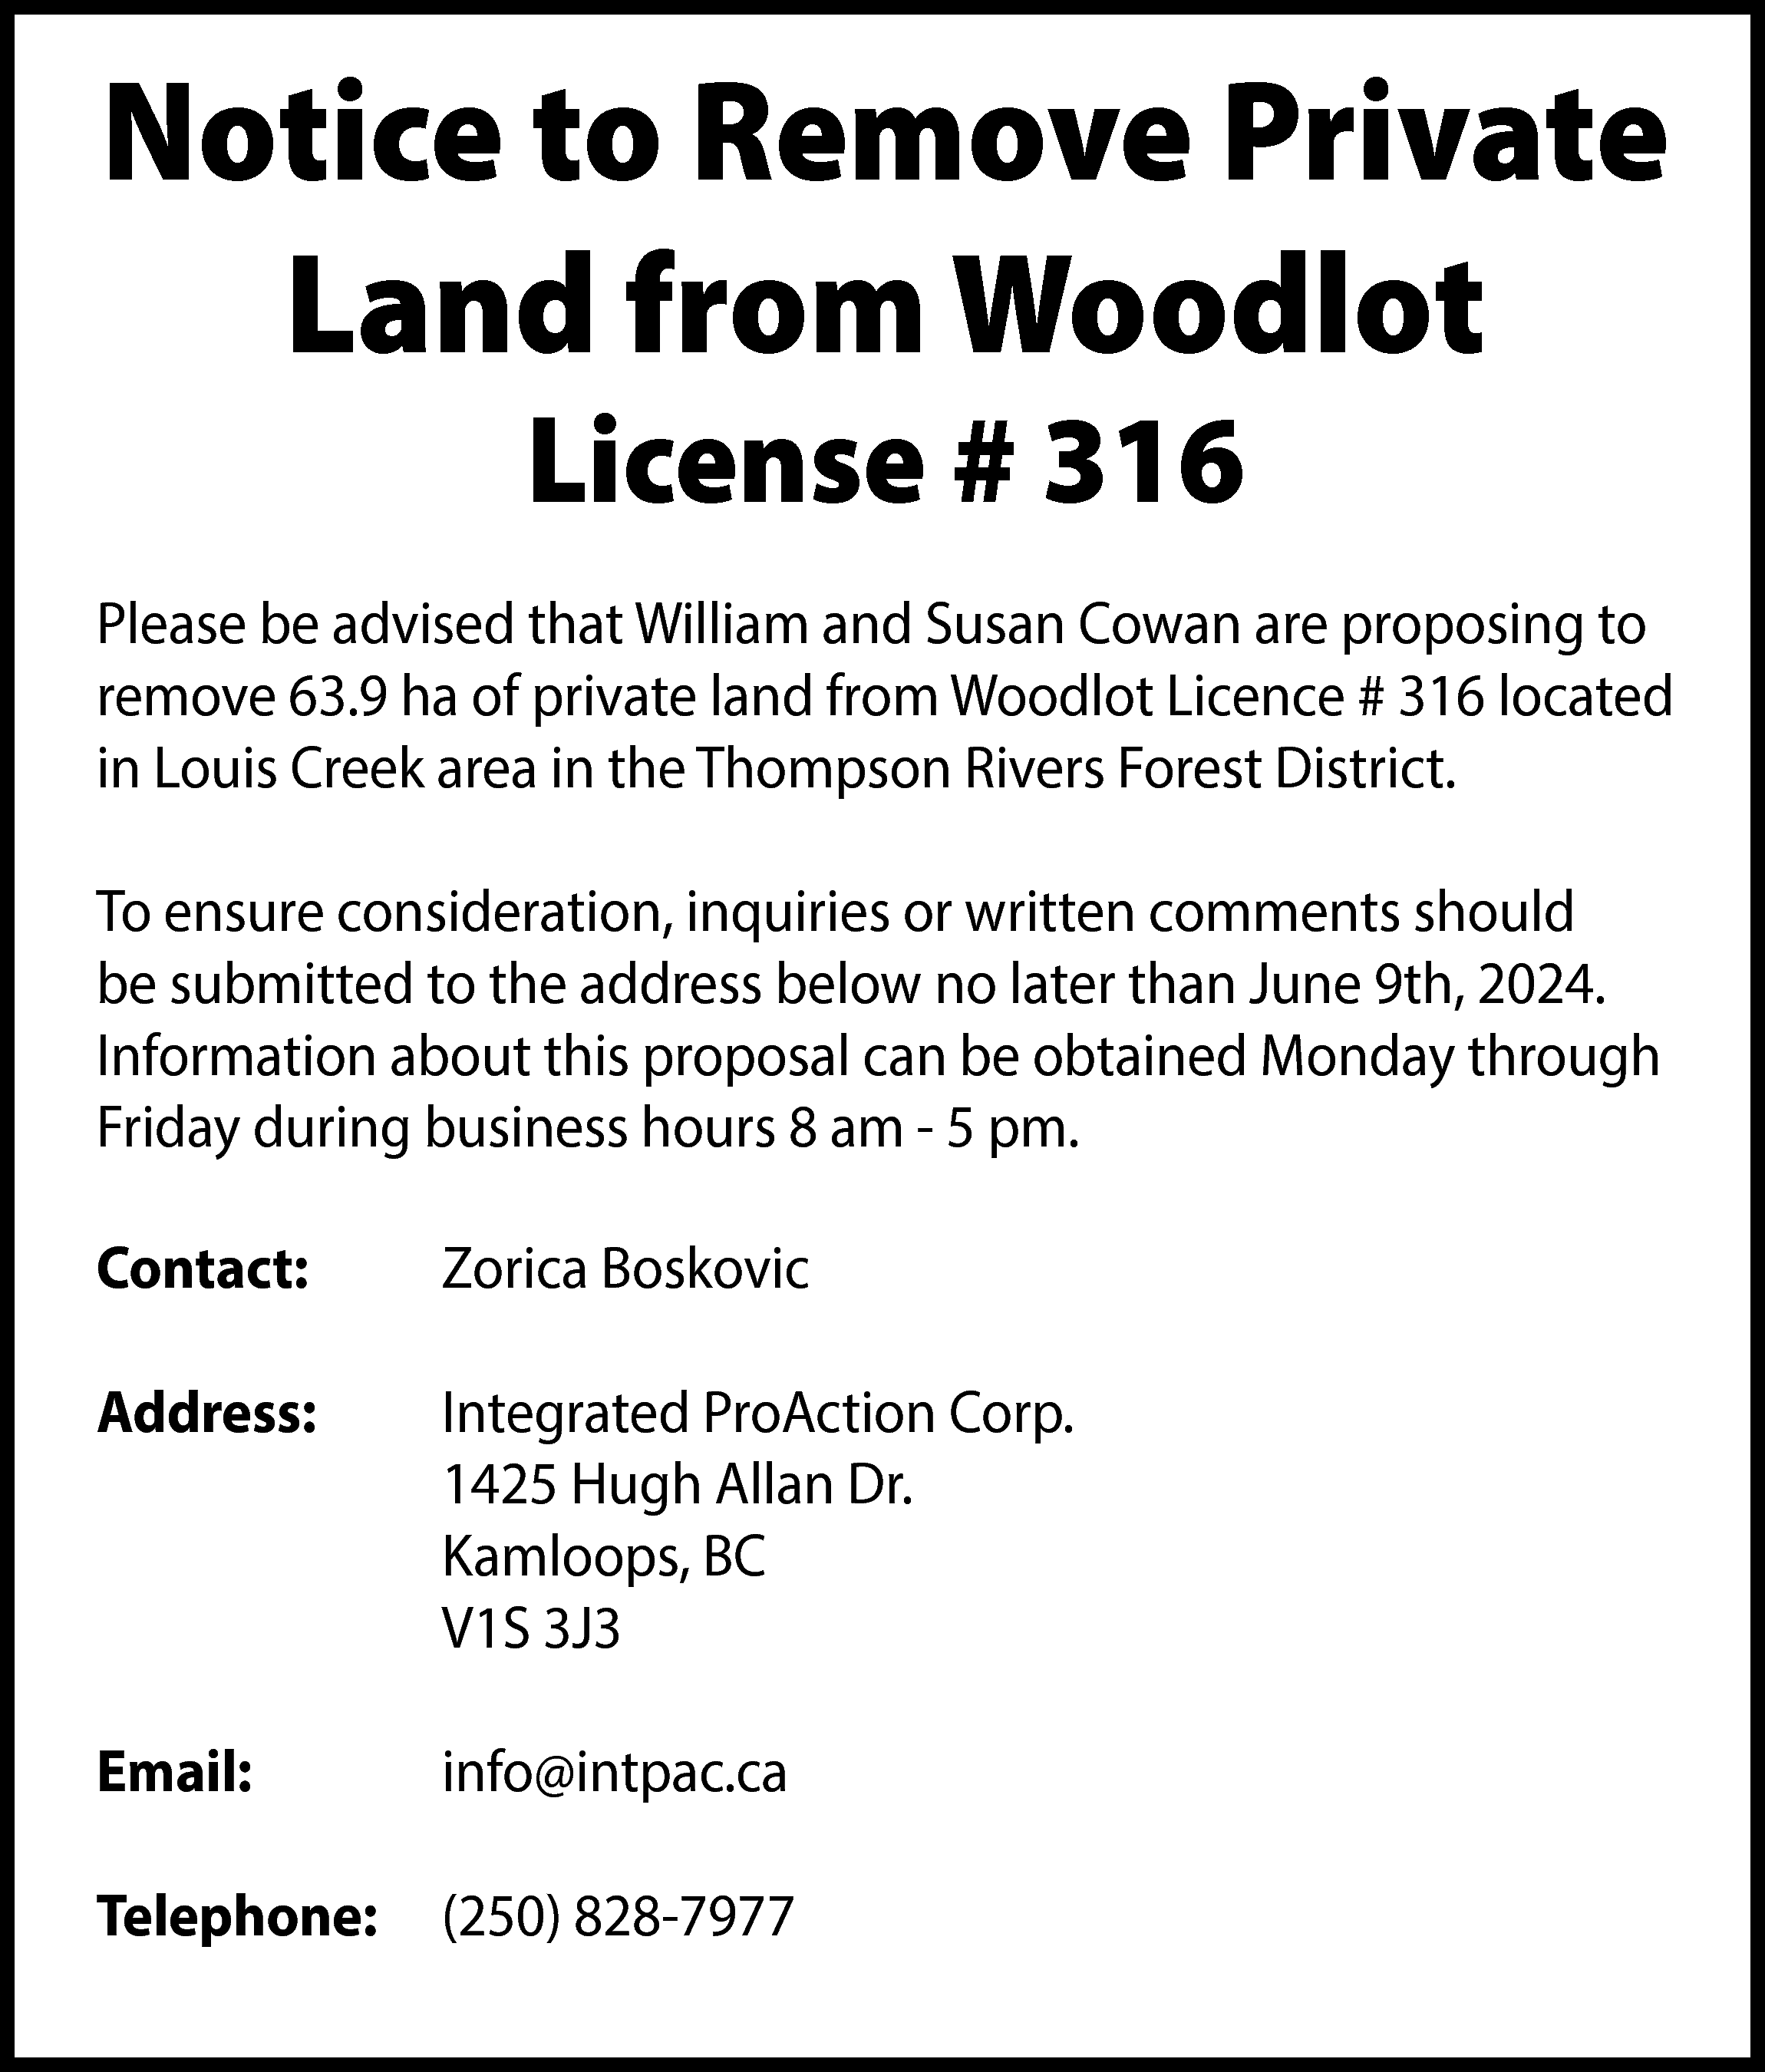 Notice to Remove Private <br>Land  Notice to Remove Private  Land from Woodlot  License # 316    Please be advised that William and Susan Cowan are proposing to  remove 63.9 ha of private land from Woodlot Licence # 316 located  in Louis Creek area in the Thompson Rivers Forest District.  To ensure consideration, inquiries or written comments should  be submitted to the address below no later than June 9th, 2024.  Information about this proposal can be obtained Monday through  Friday during business hours 8 am - 5 pm.  Contact:    Zorica Boskovic    Address:    Integrated ProAction Corp.  1425 Hugh Allan Dr.  Kamloops, BC  V1S 3J3    Email:    info@intpac.ca    Telephone:    (250) 828-7977    